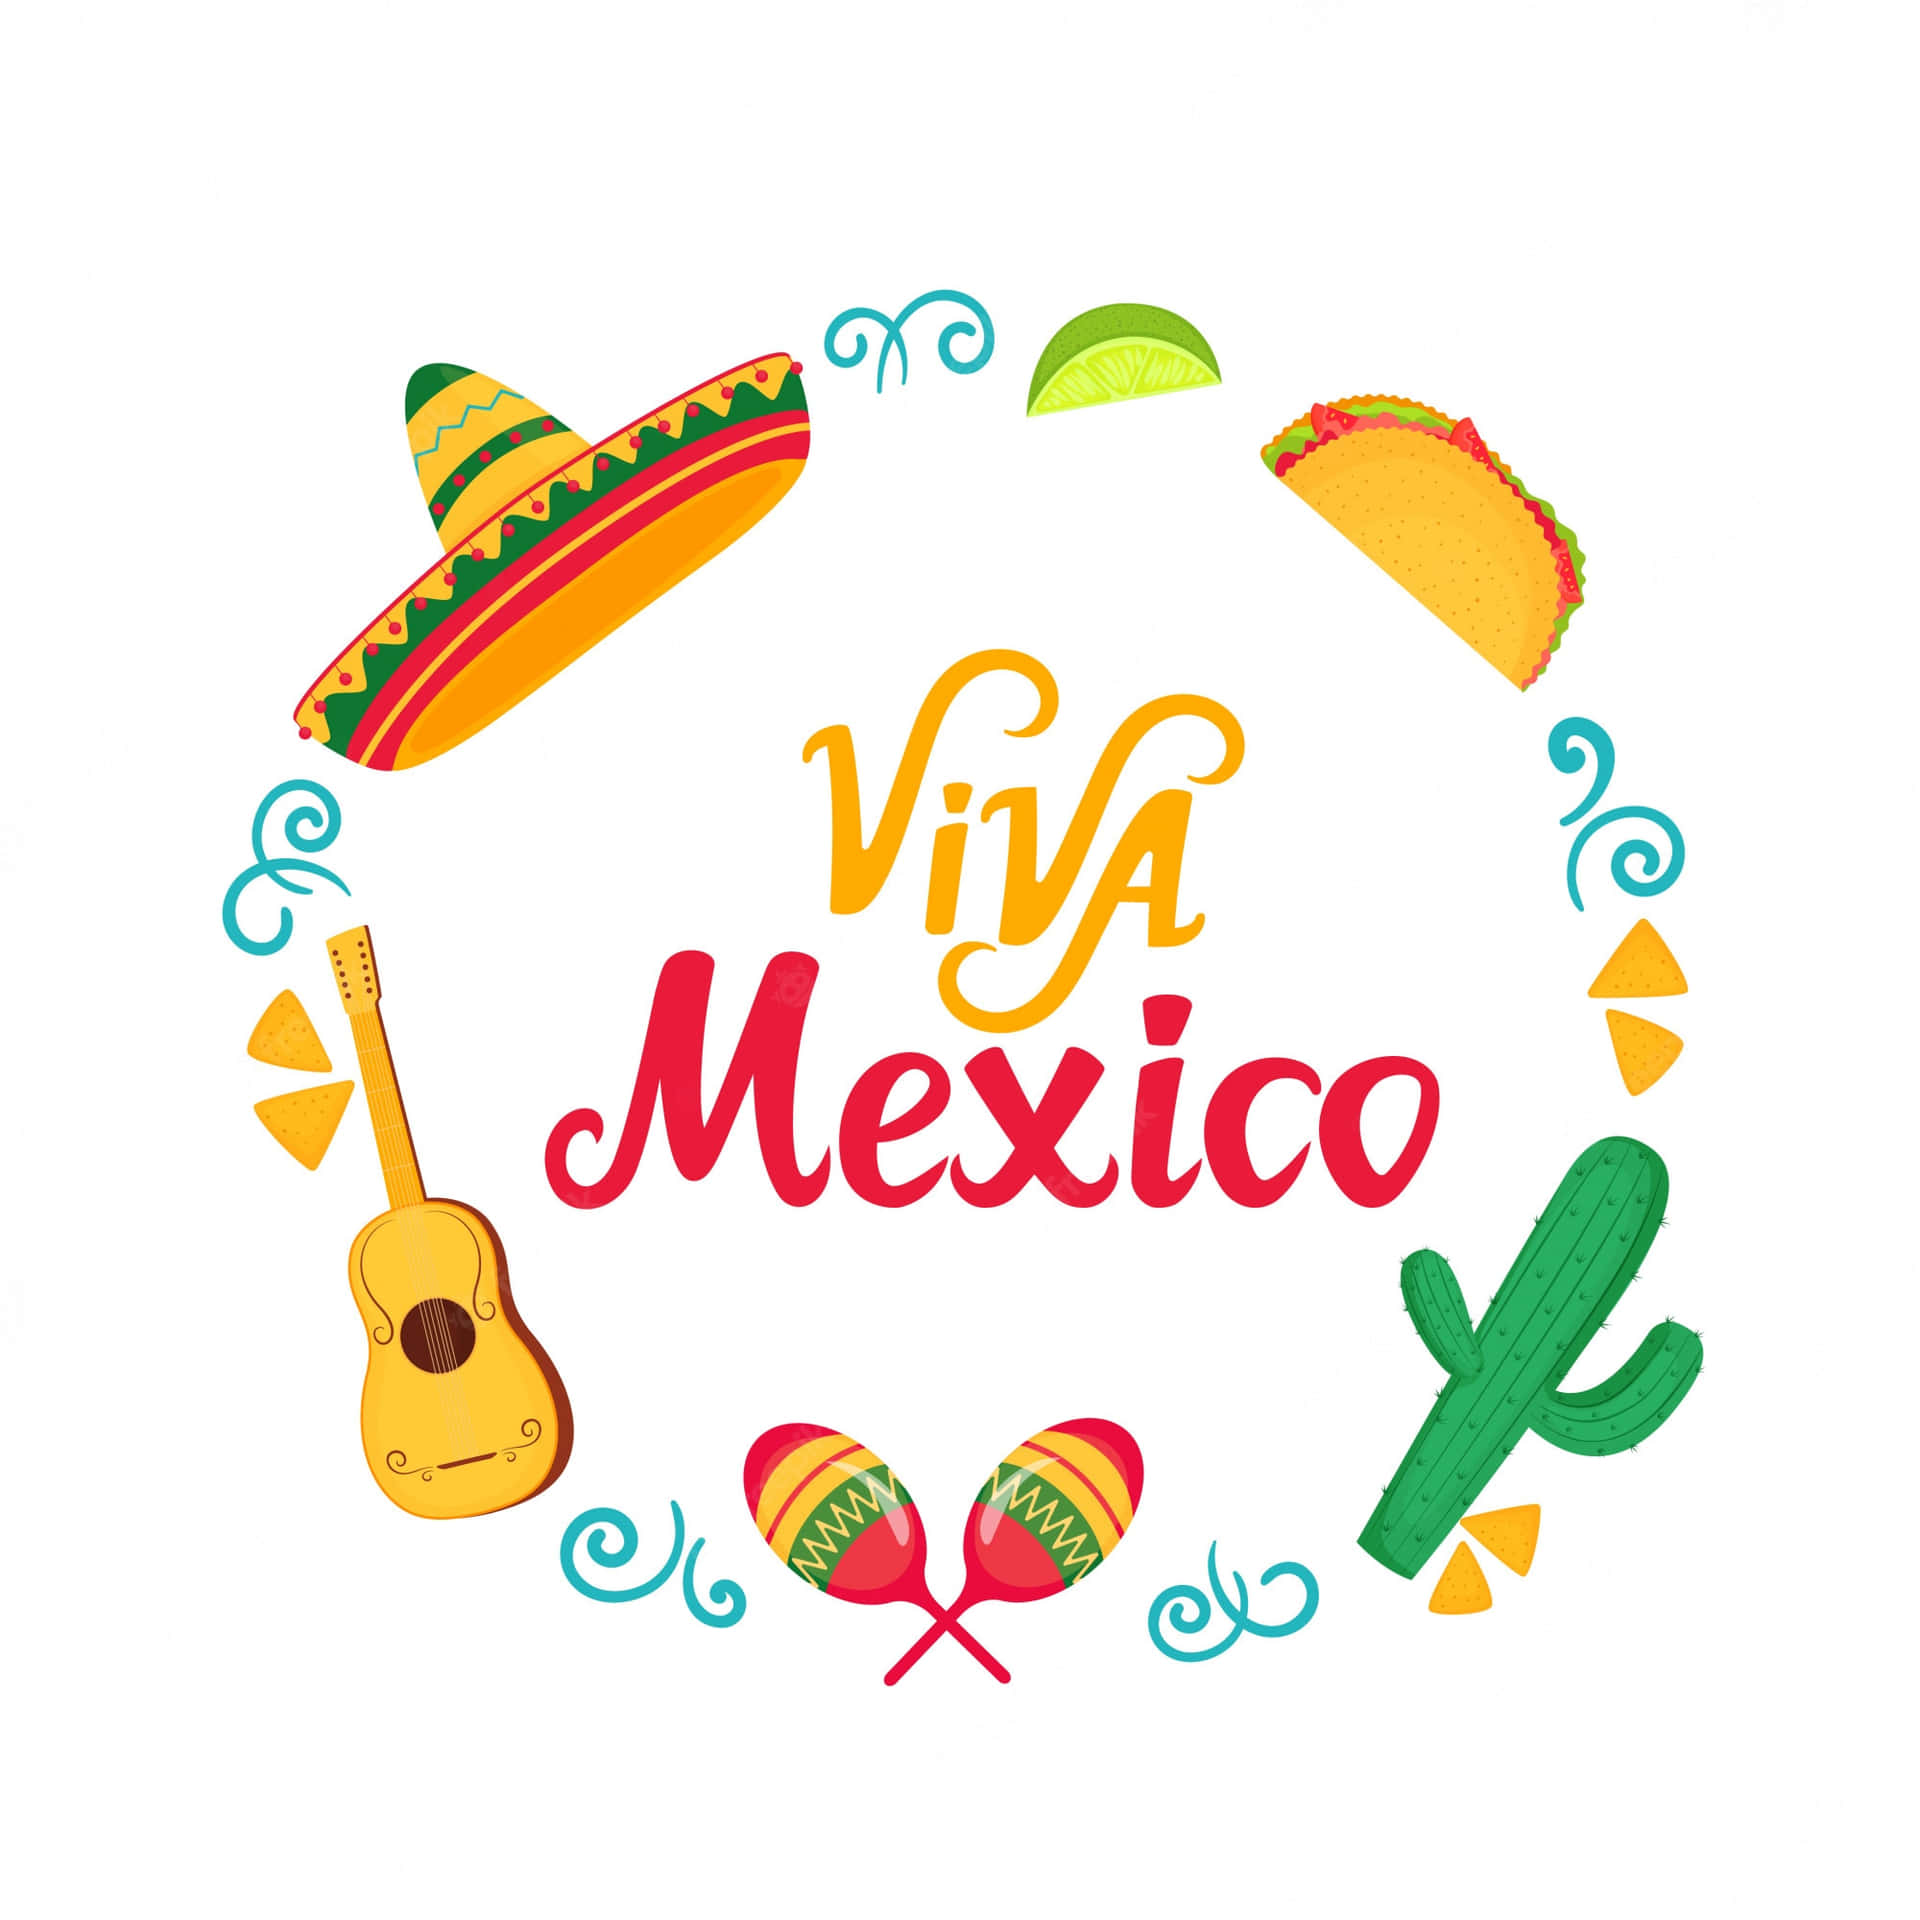 Viva Mexico - Celebrating The Culture And People Of Mexico